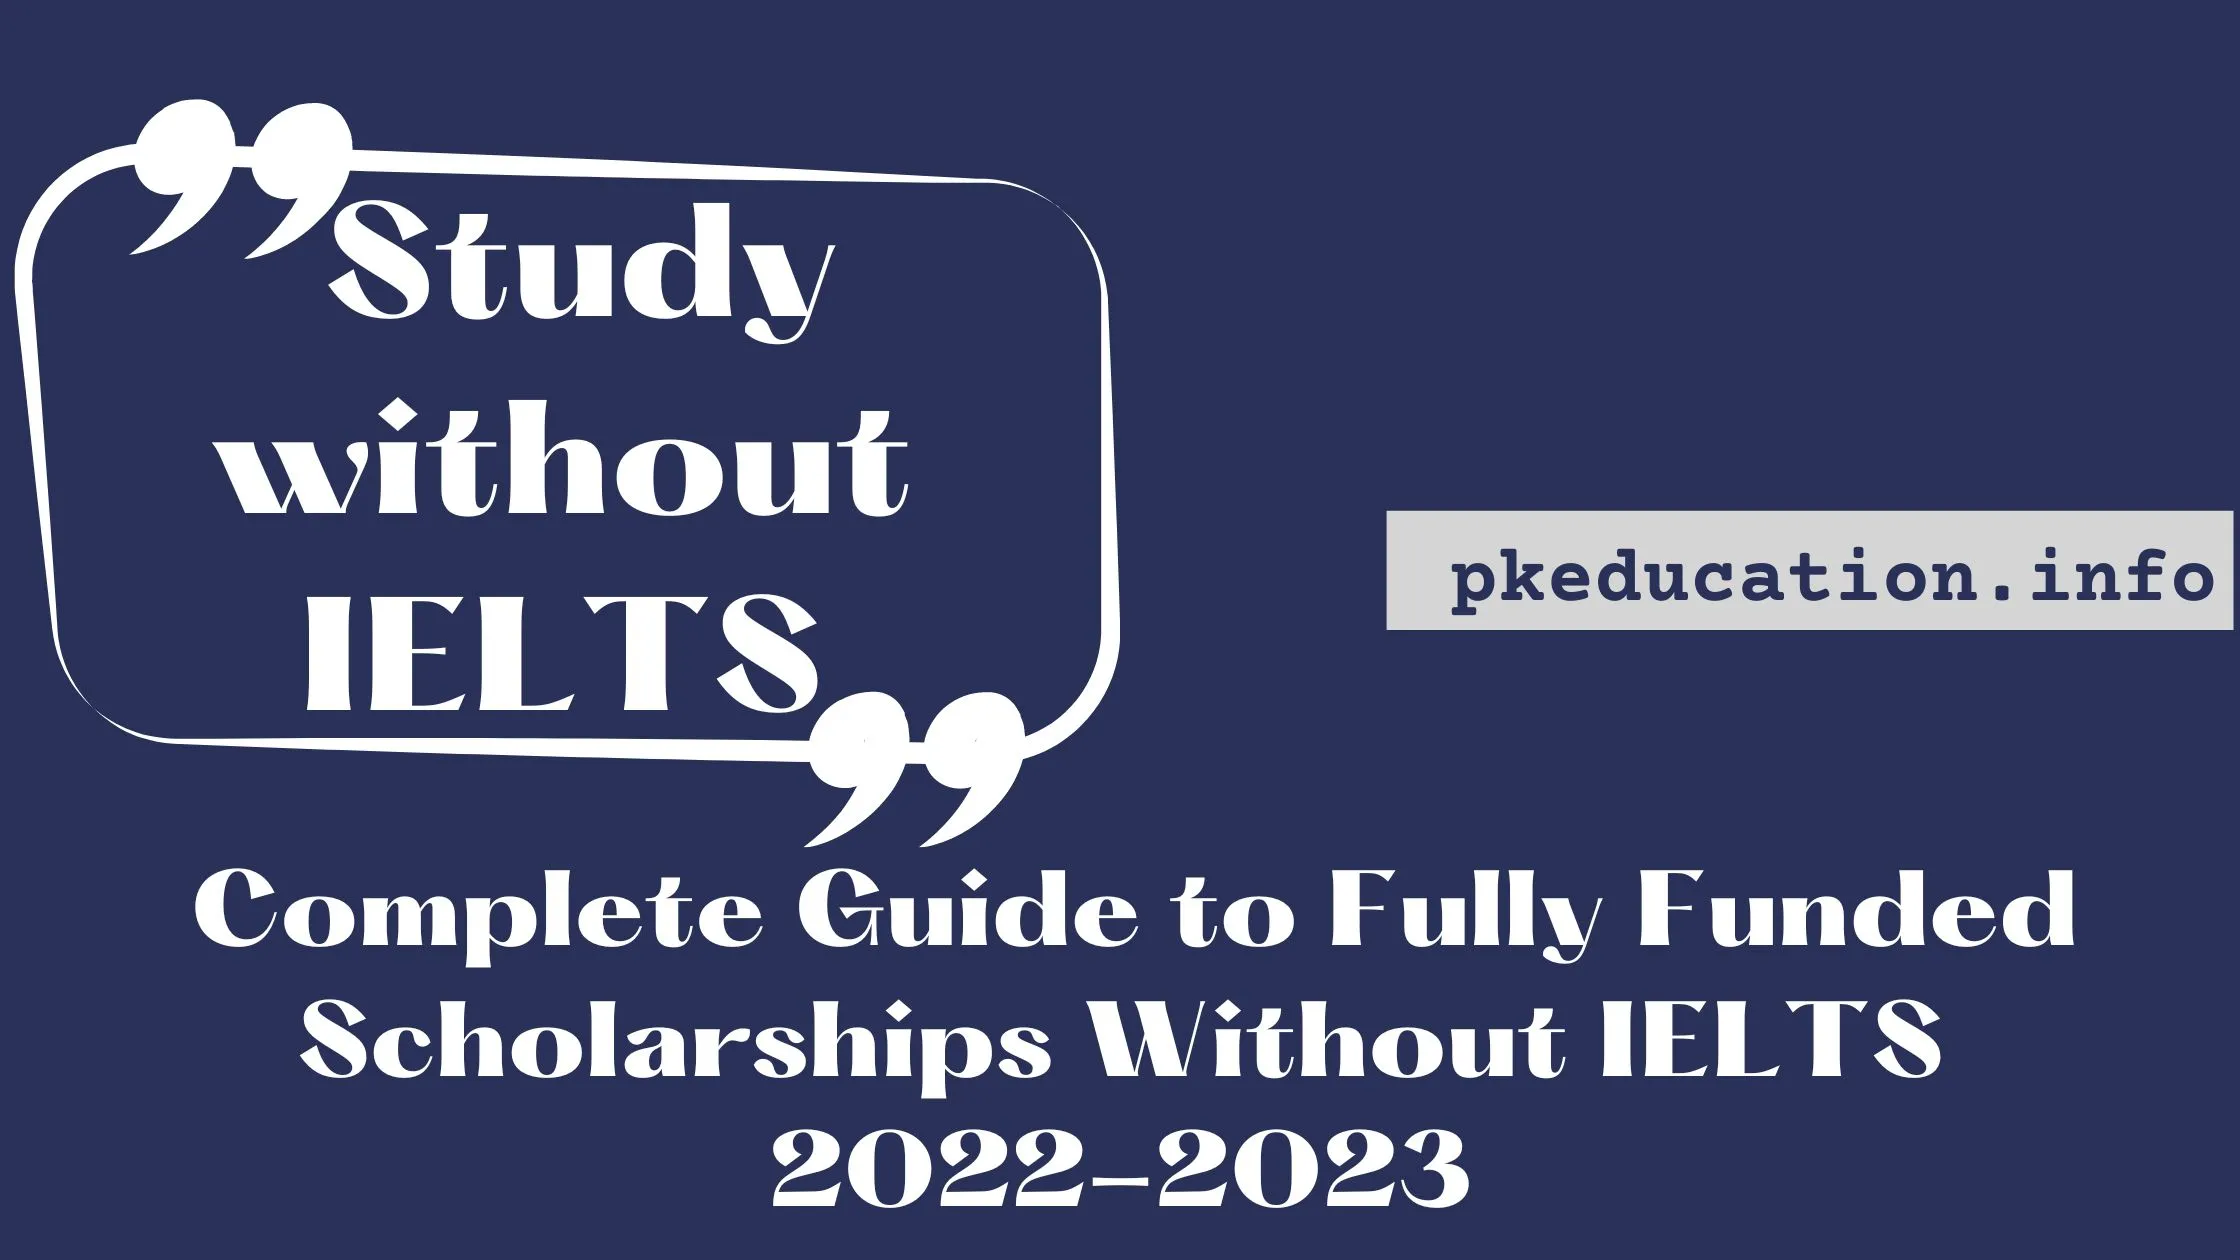 Complete Guide to Fully Funded Scholarships Without IELTS 2022-2023